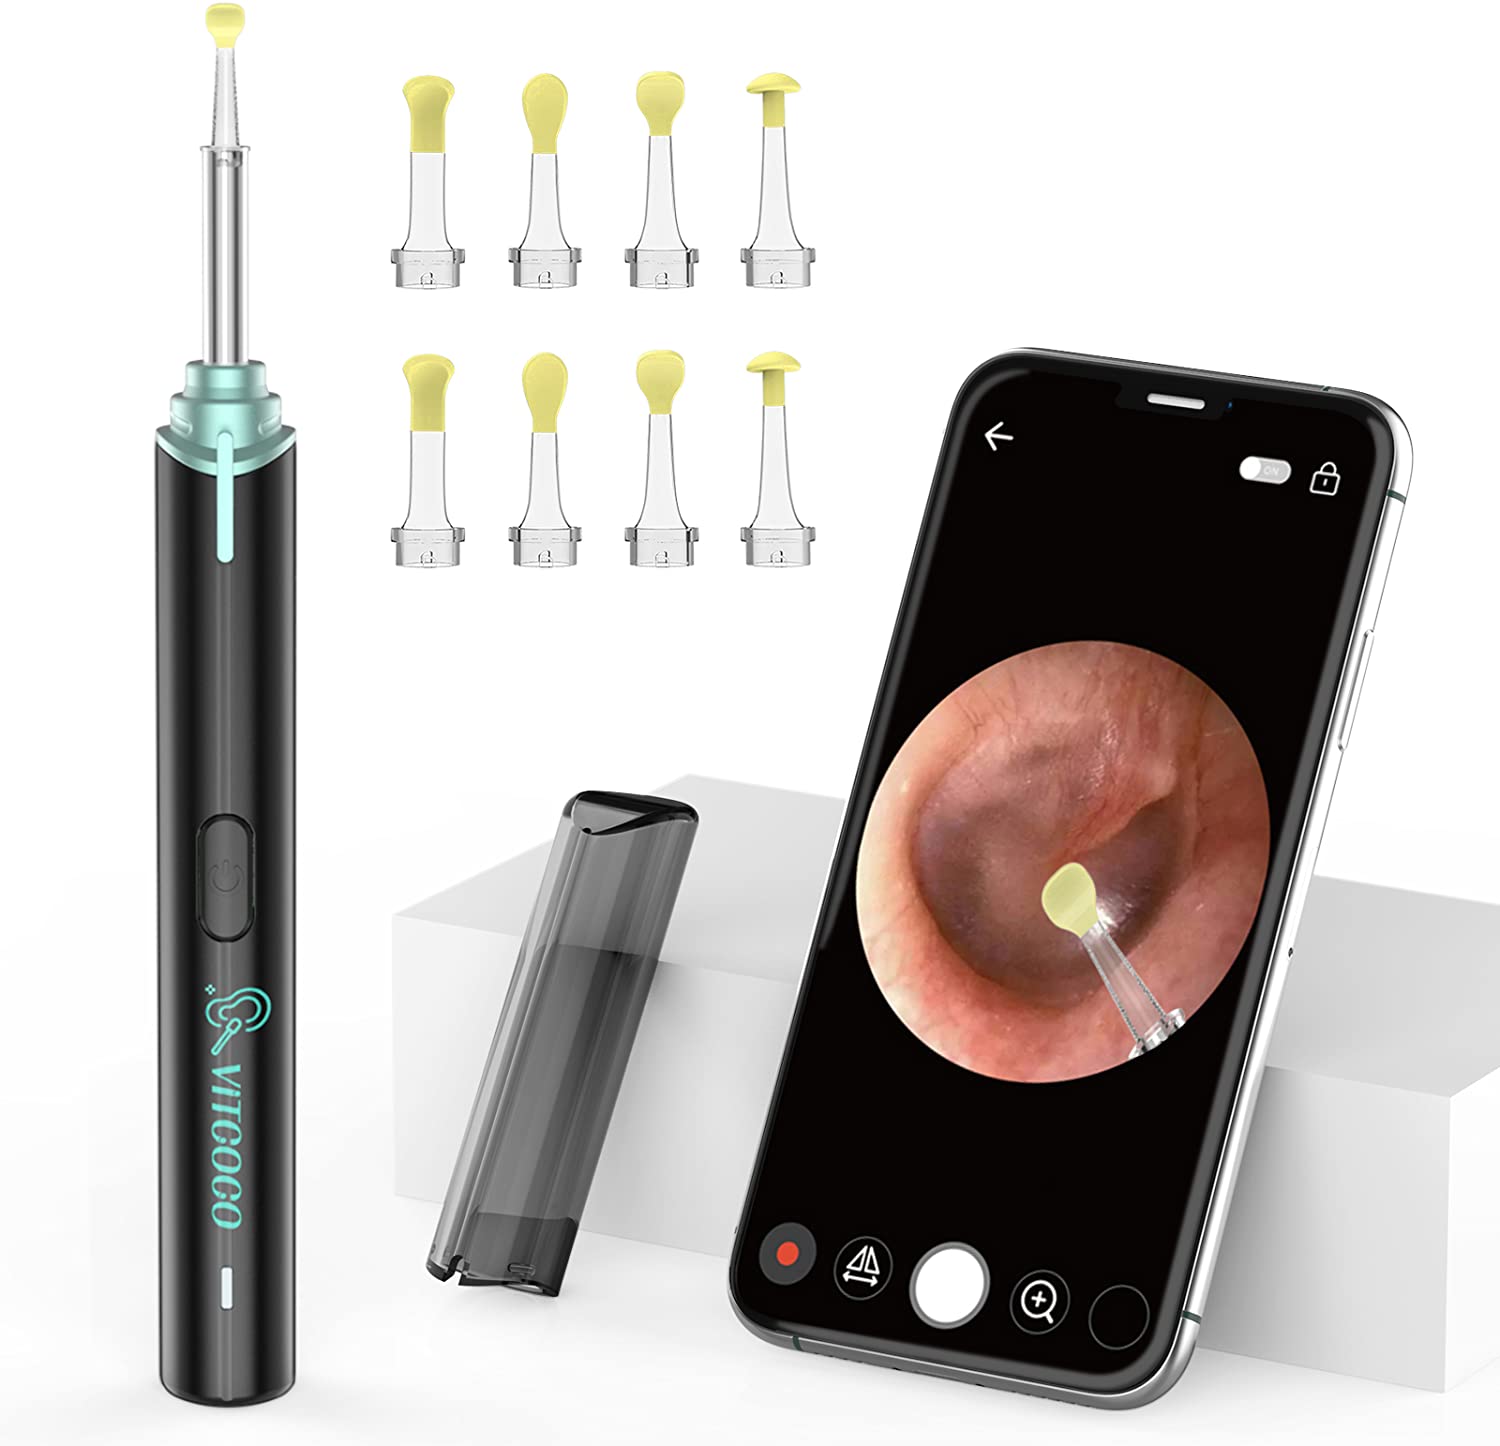 Pancellent Digital Otoscope Camera with Light, Ear Camera and Wax Remover,  Video Ear Scope with Ear Wax Removal Tools, Compatible with iPhone, iPad,  Android Smart Phone (Basic Edition White) - Coupon Codes